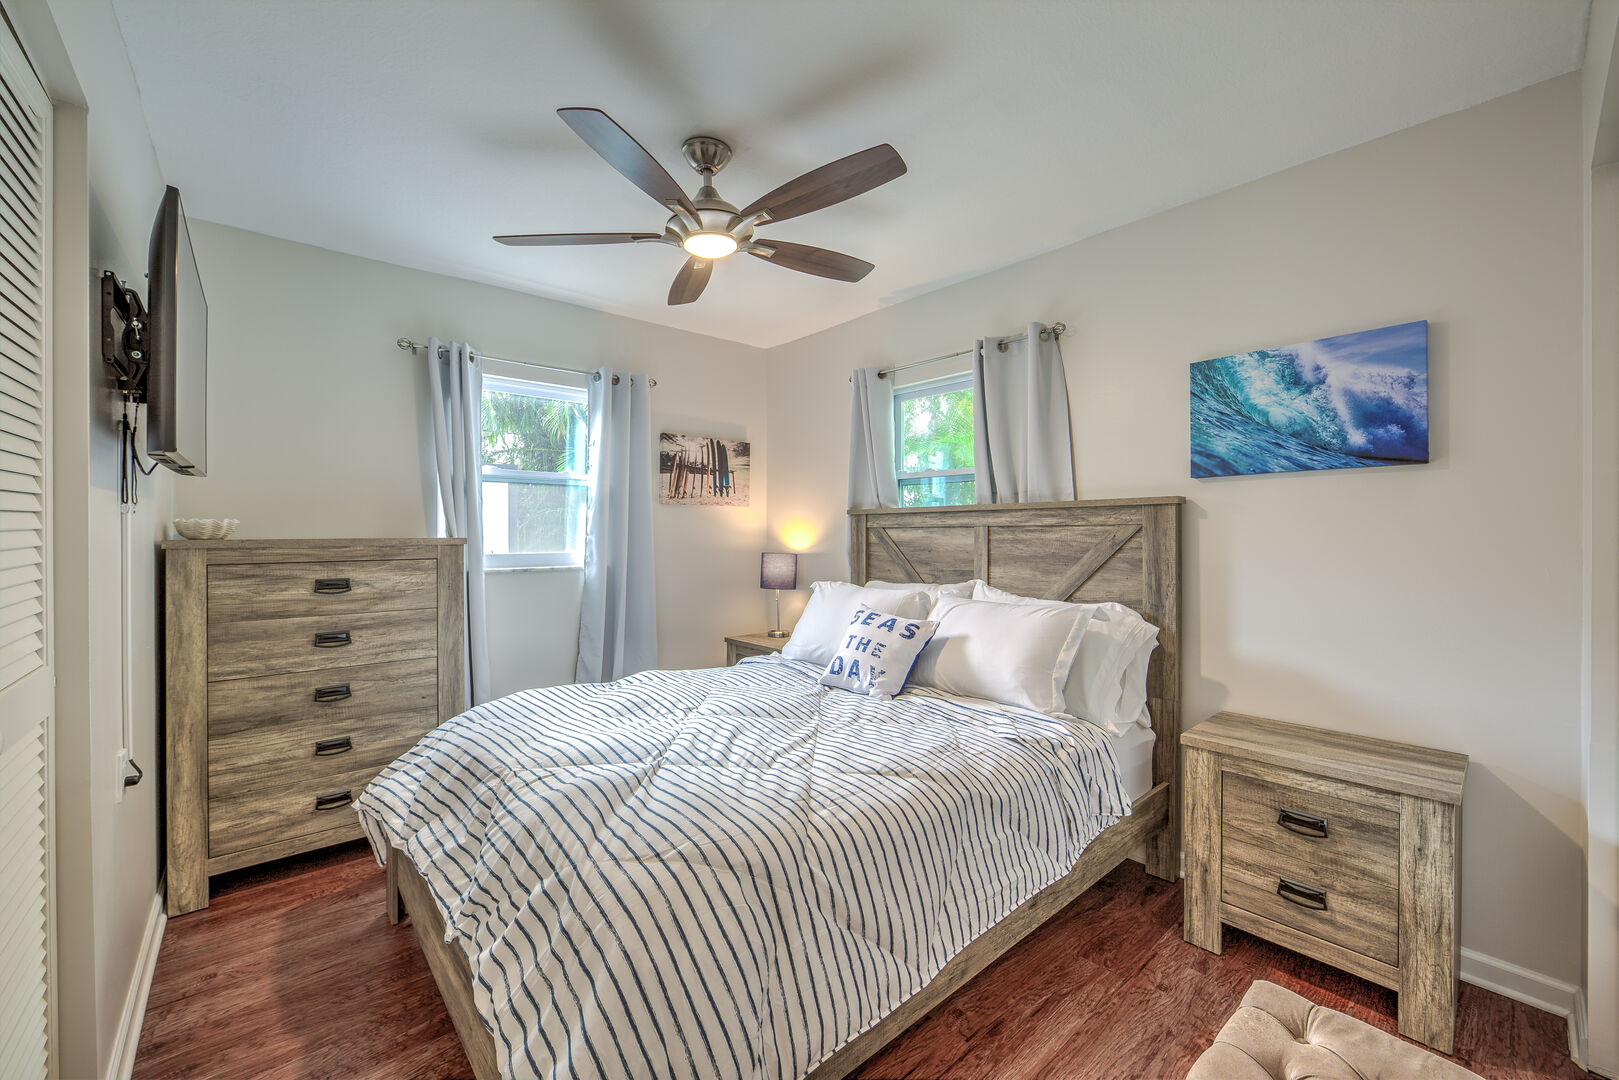 Bedrooms of the Vacation Homes in Fort Myers